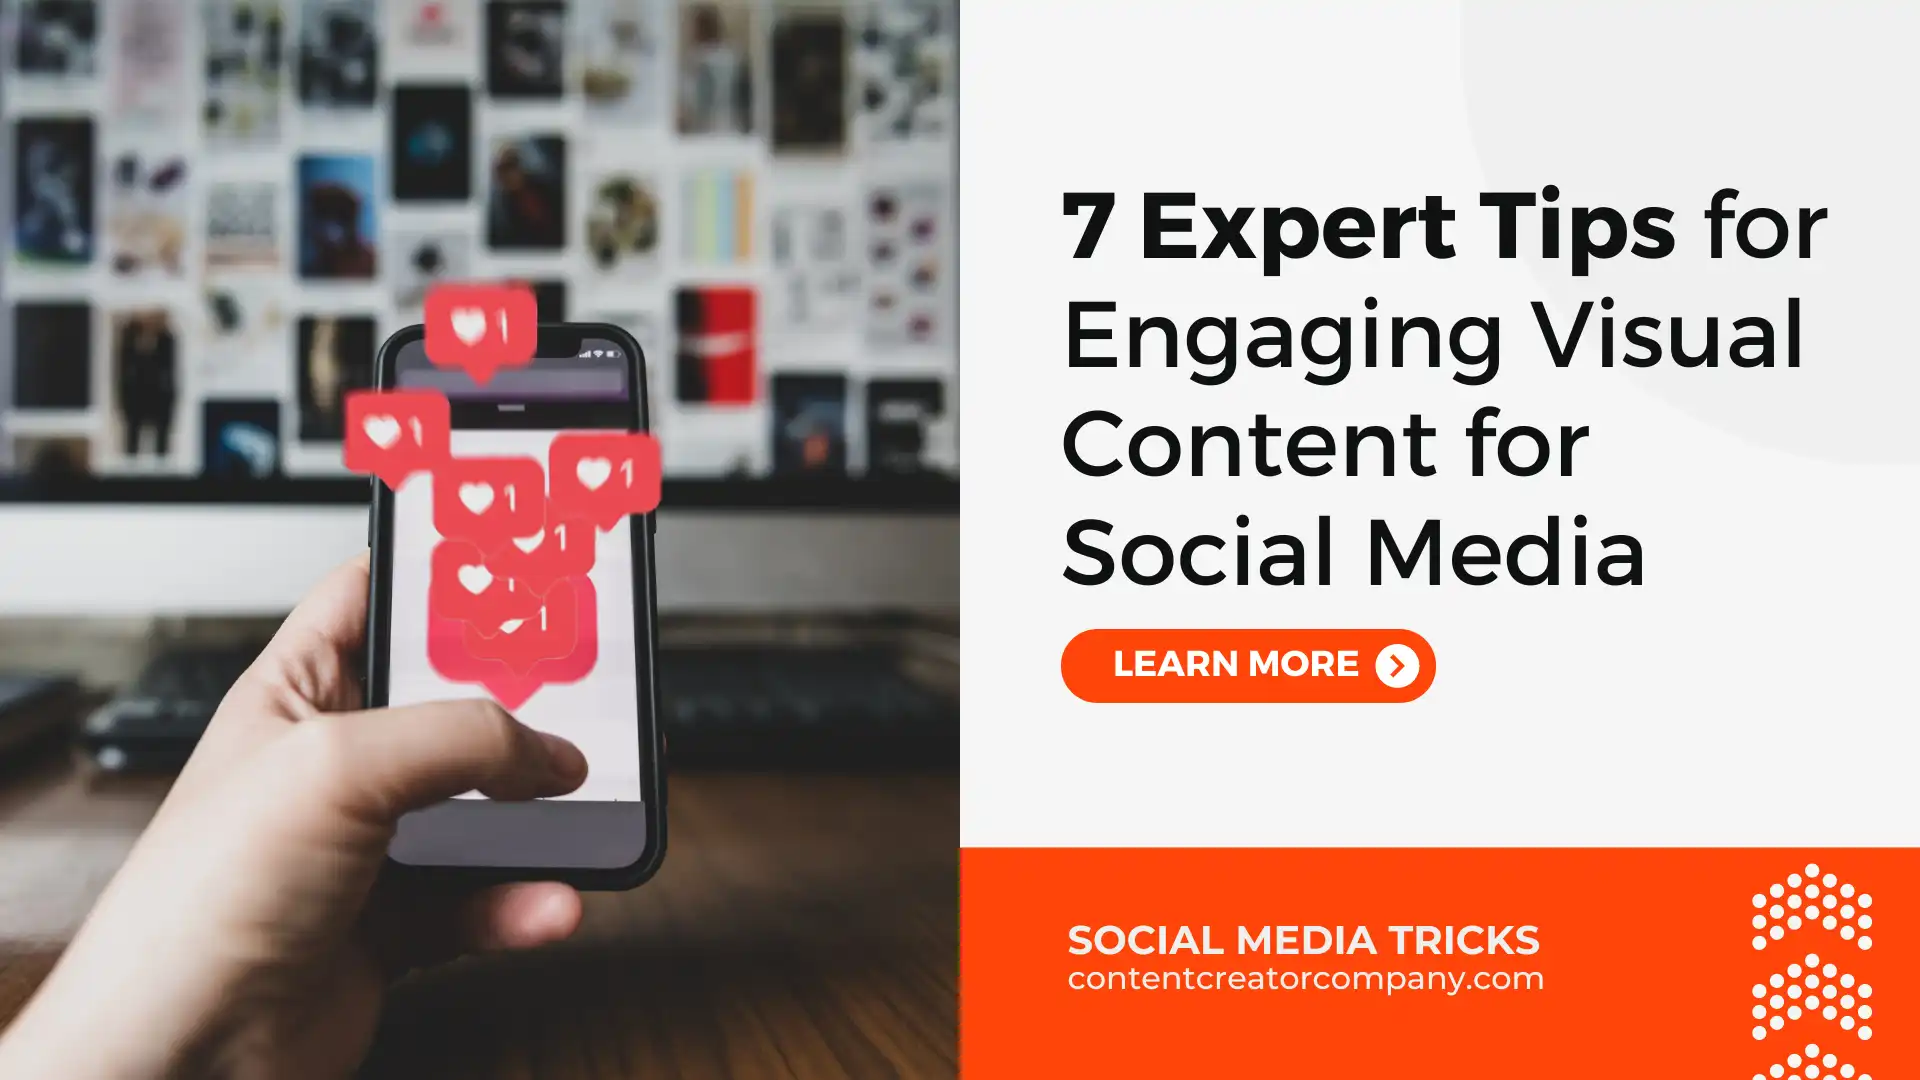 Tips for Engaging Visual Content for Social Media.